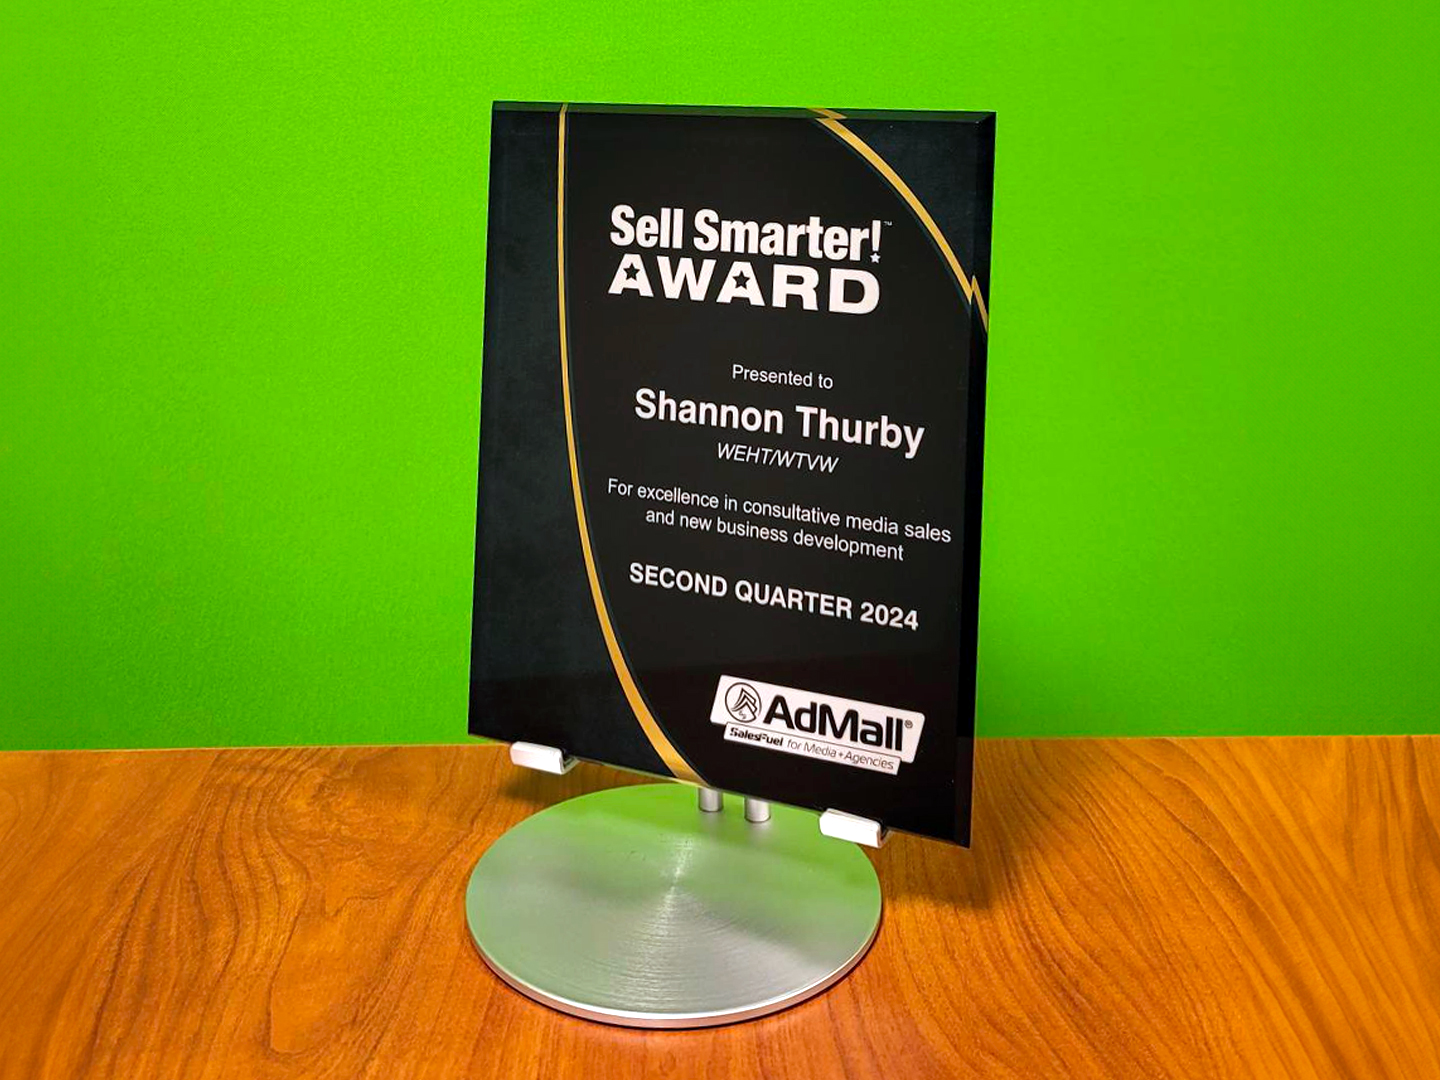 Shannon Thurby Local Electrical Contractor on a New Ad Campaign